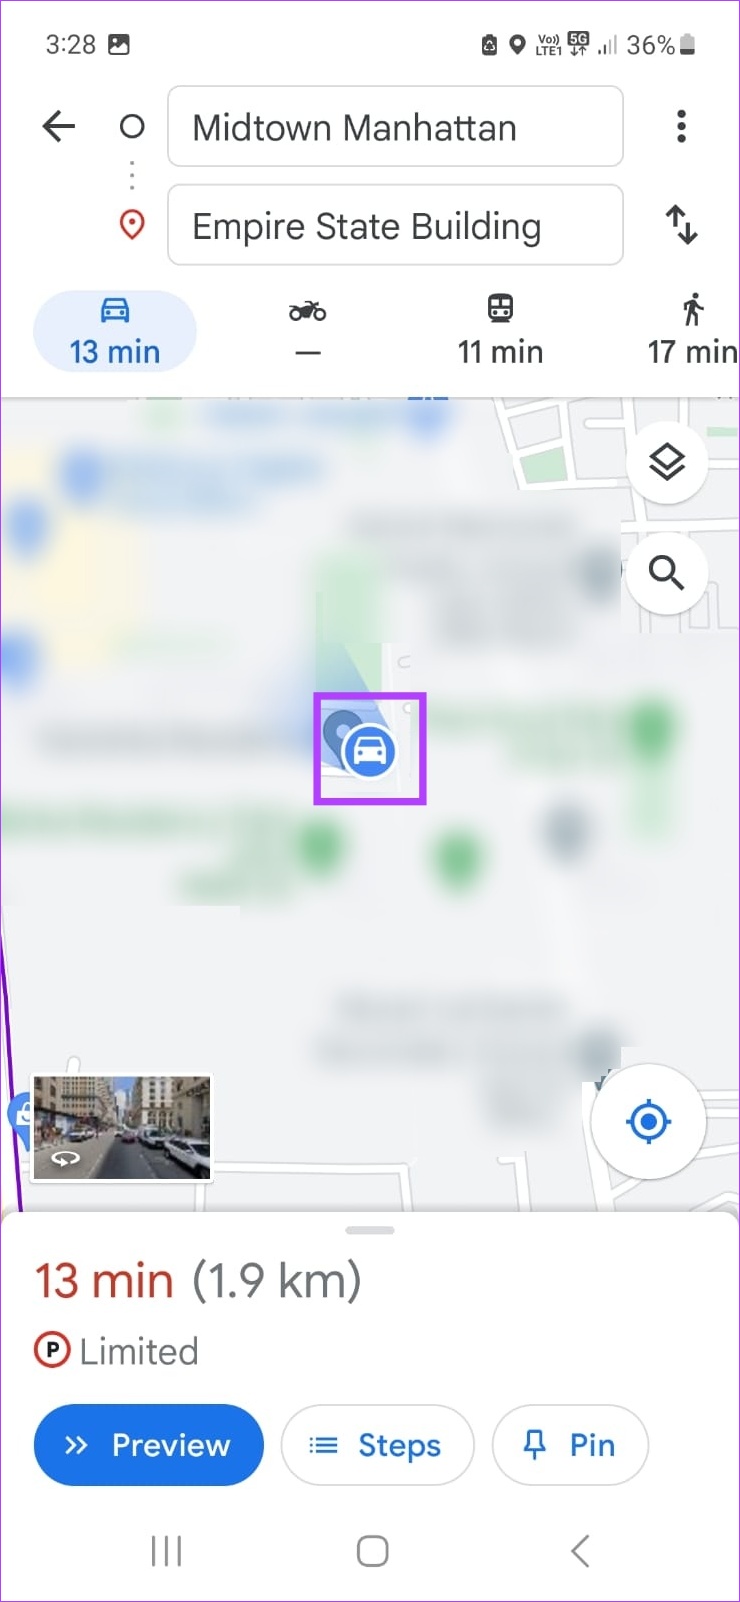 Tap on the blue location icon